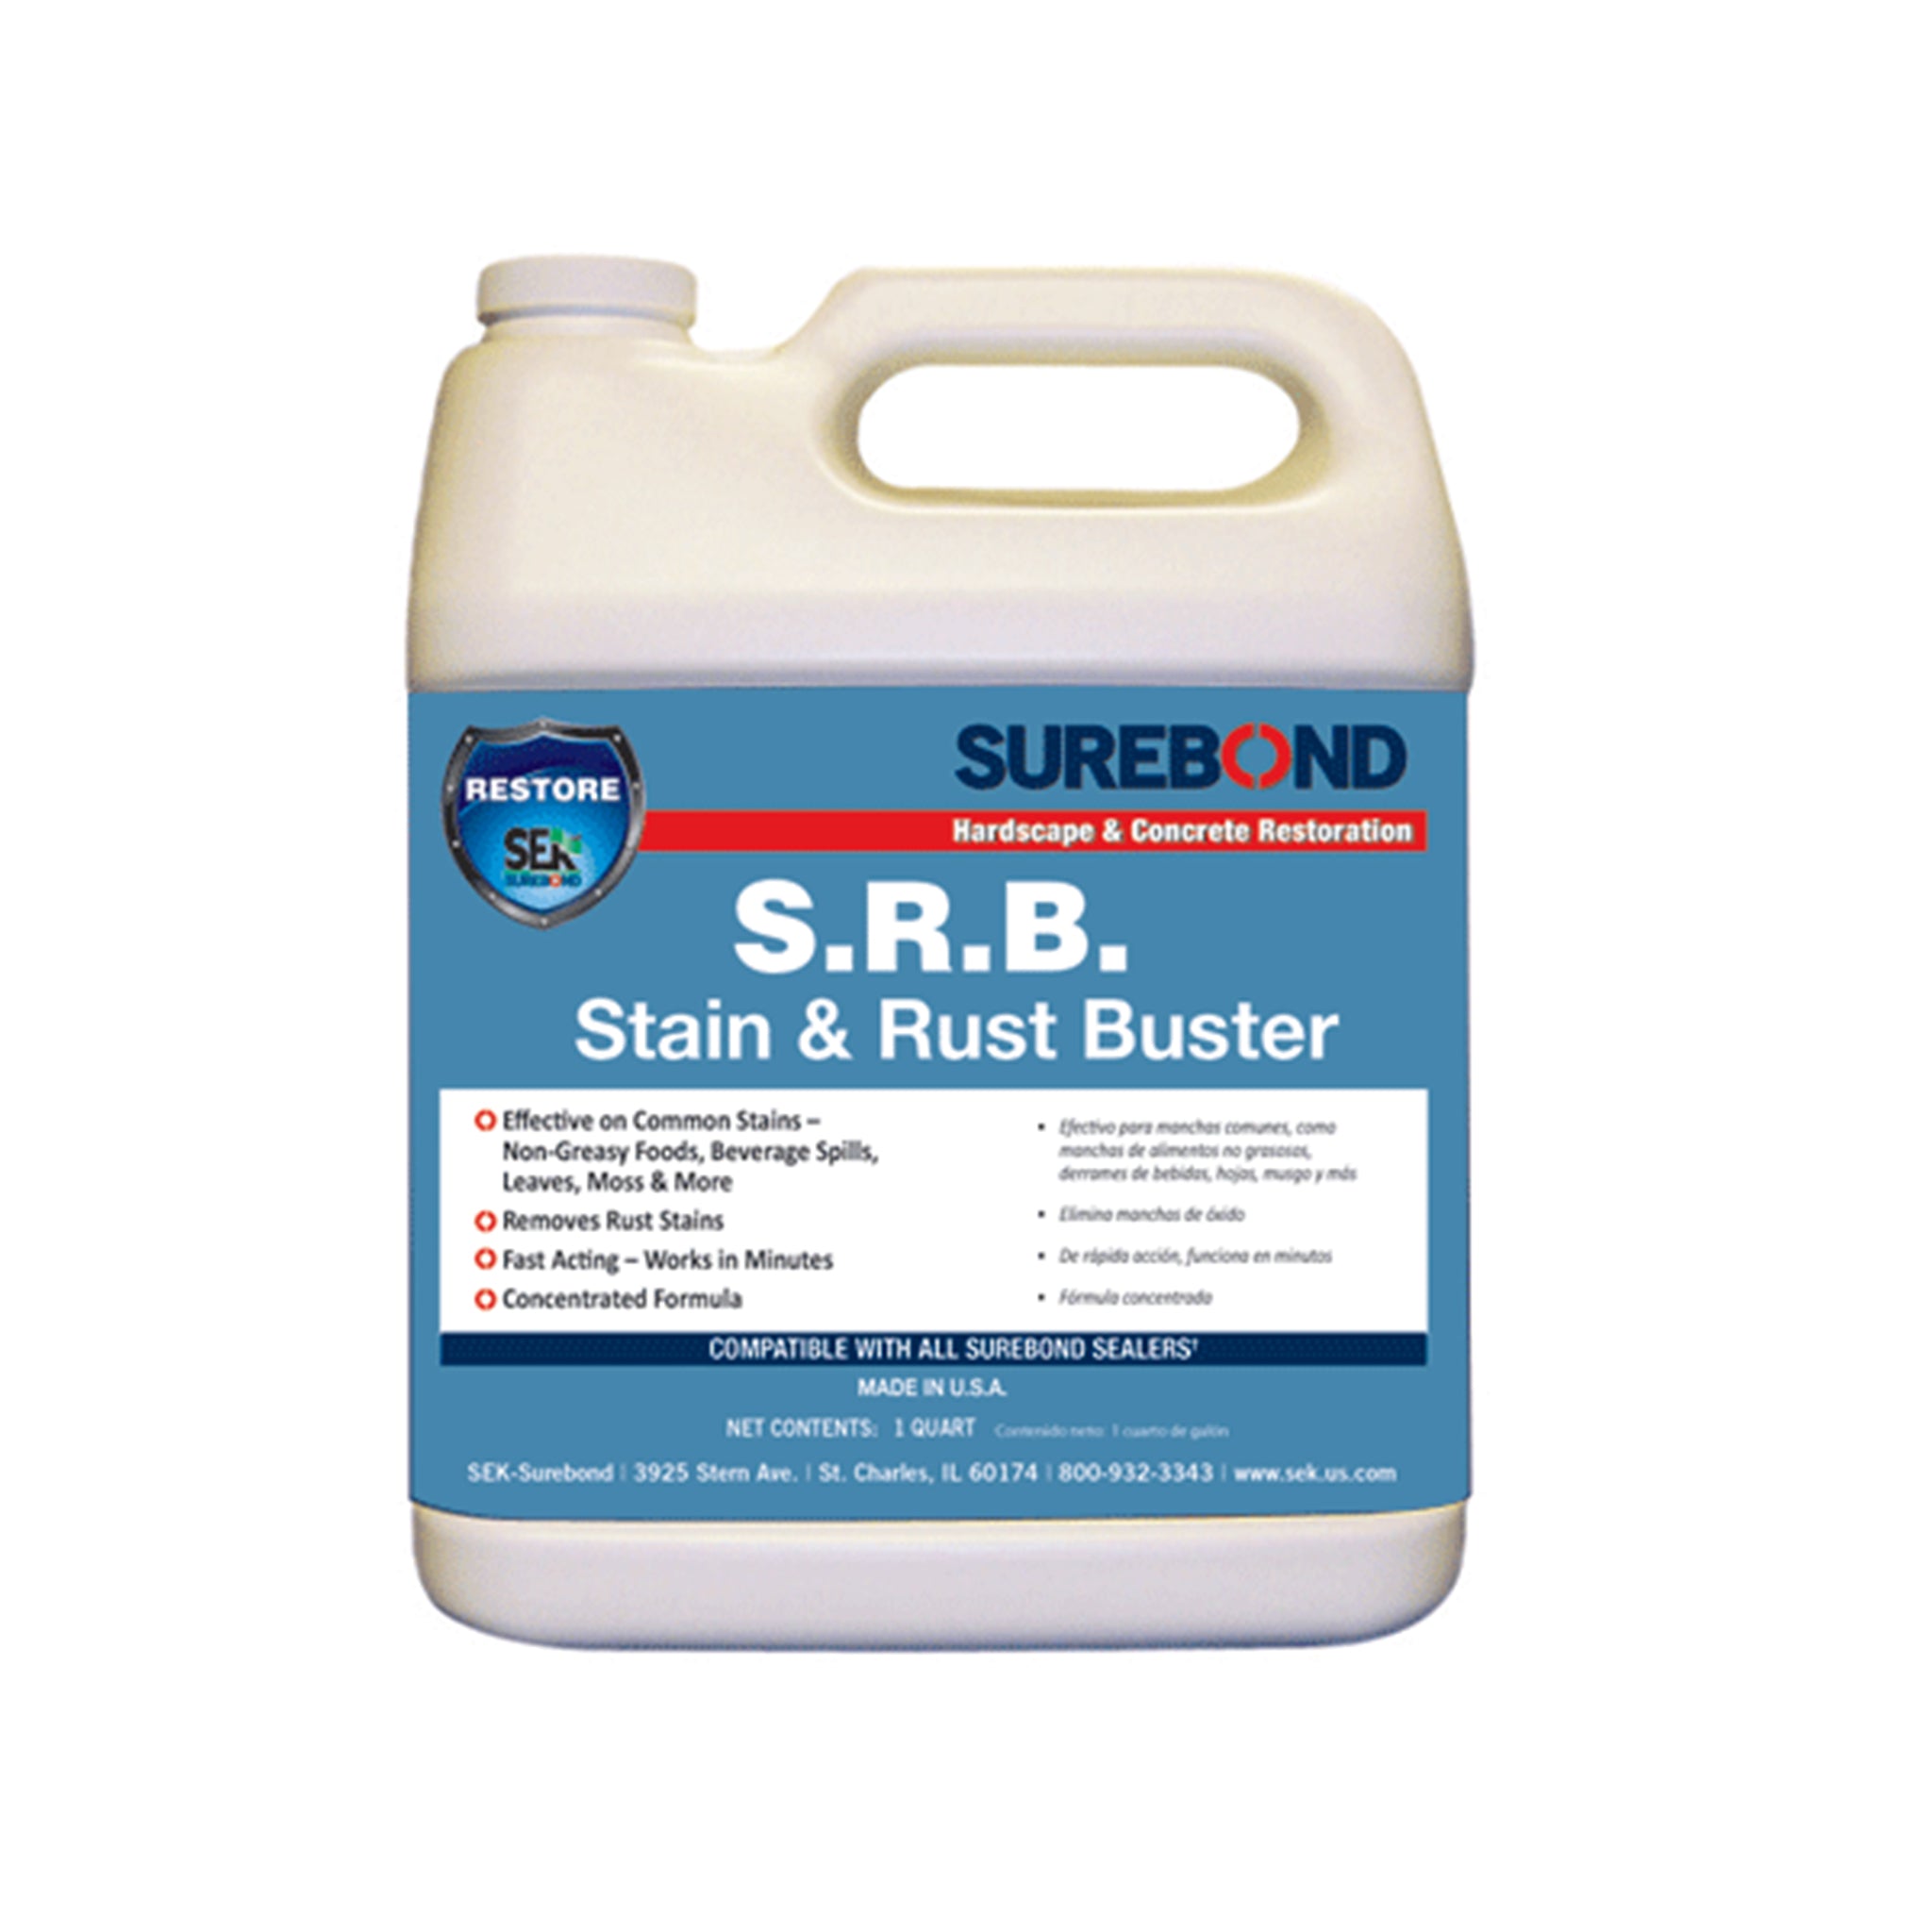 Surebond S.R.B Stain and Rust Buster Patio Care photo